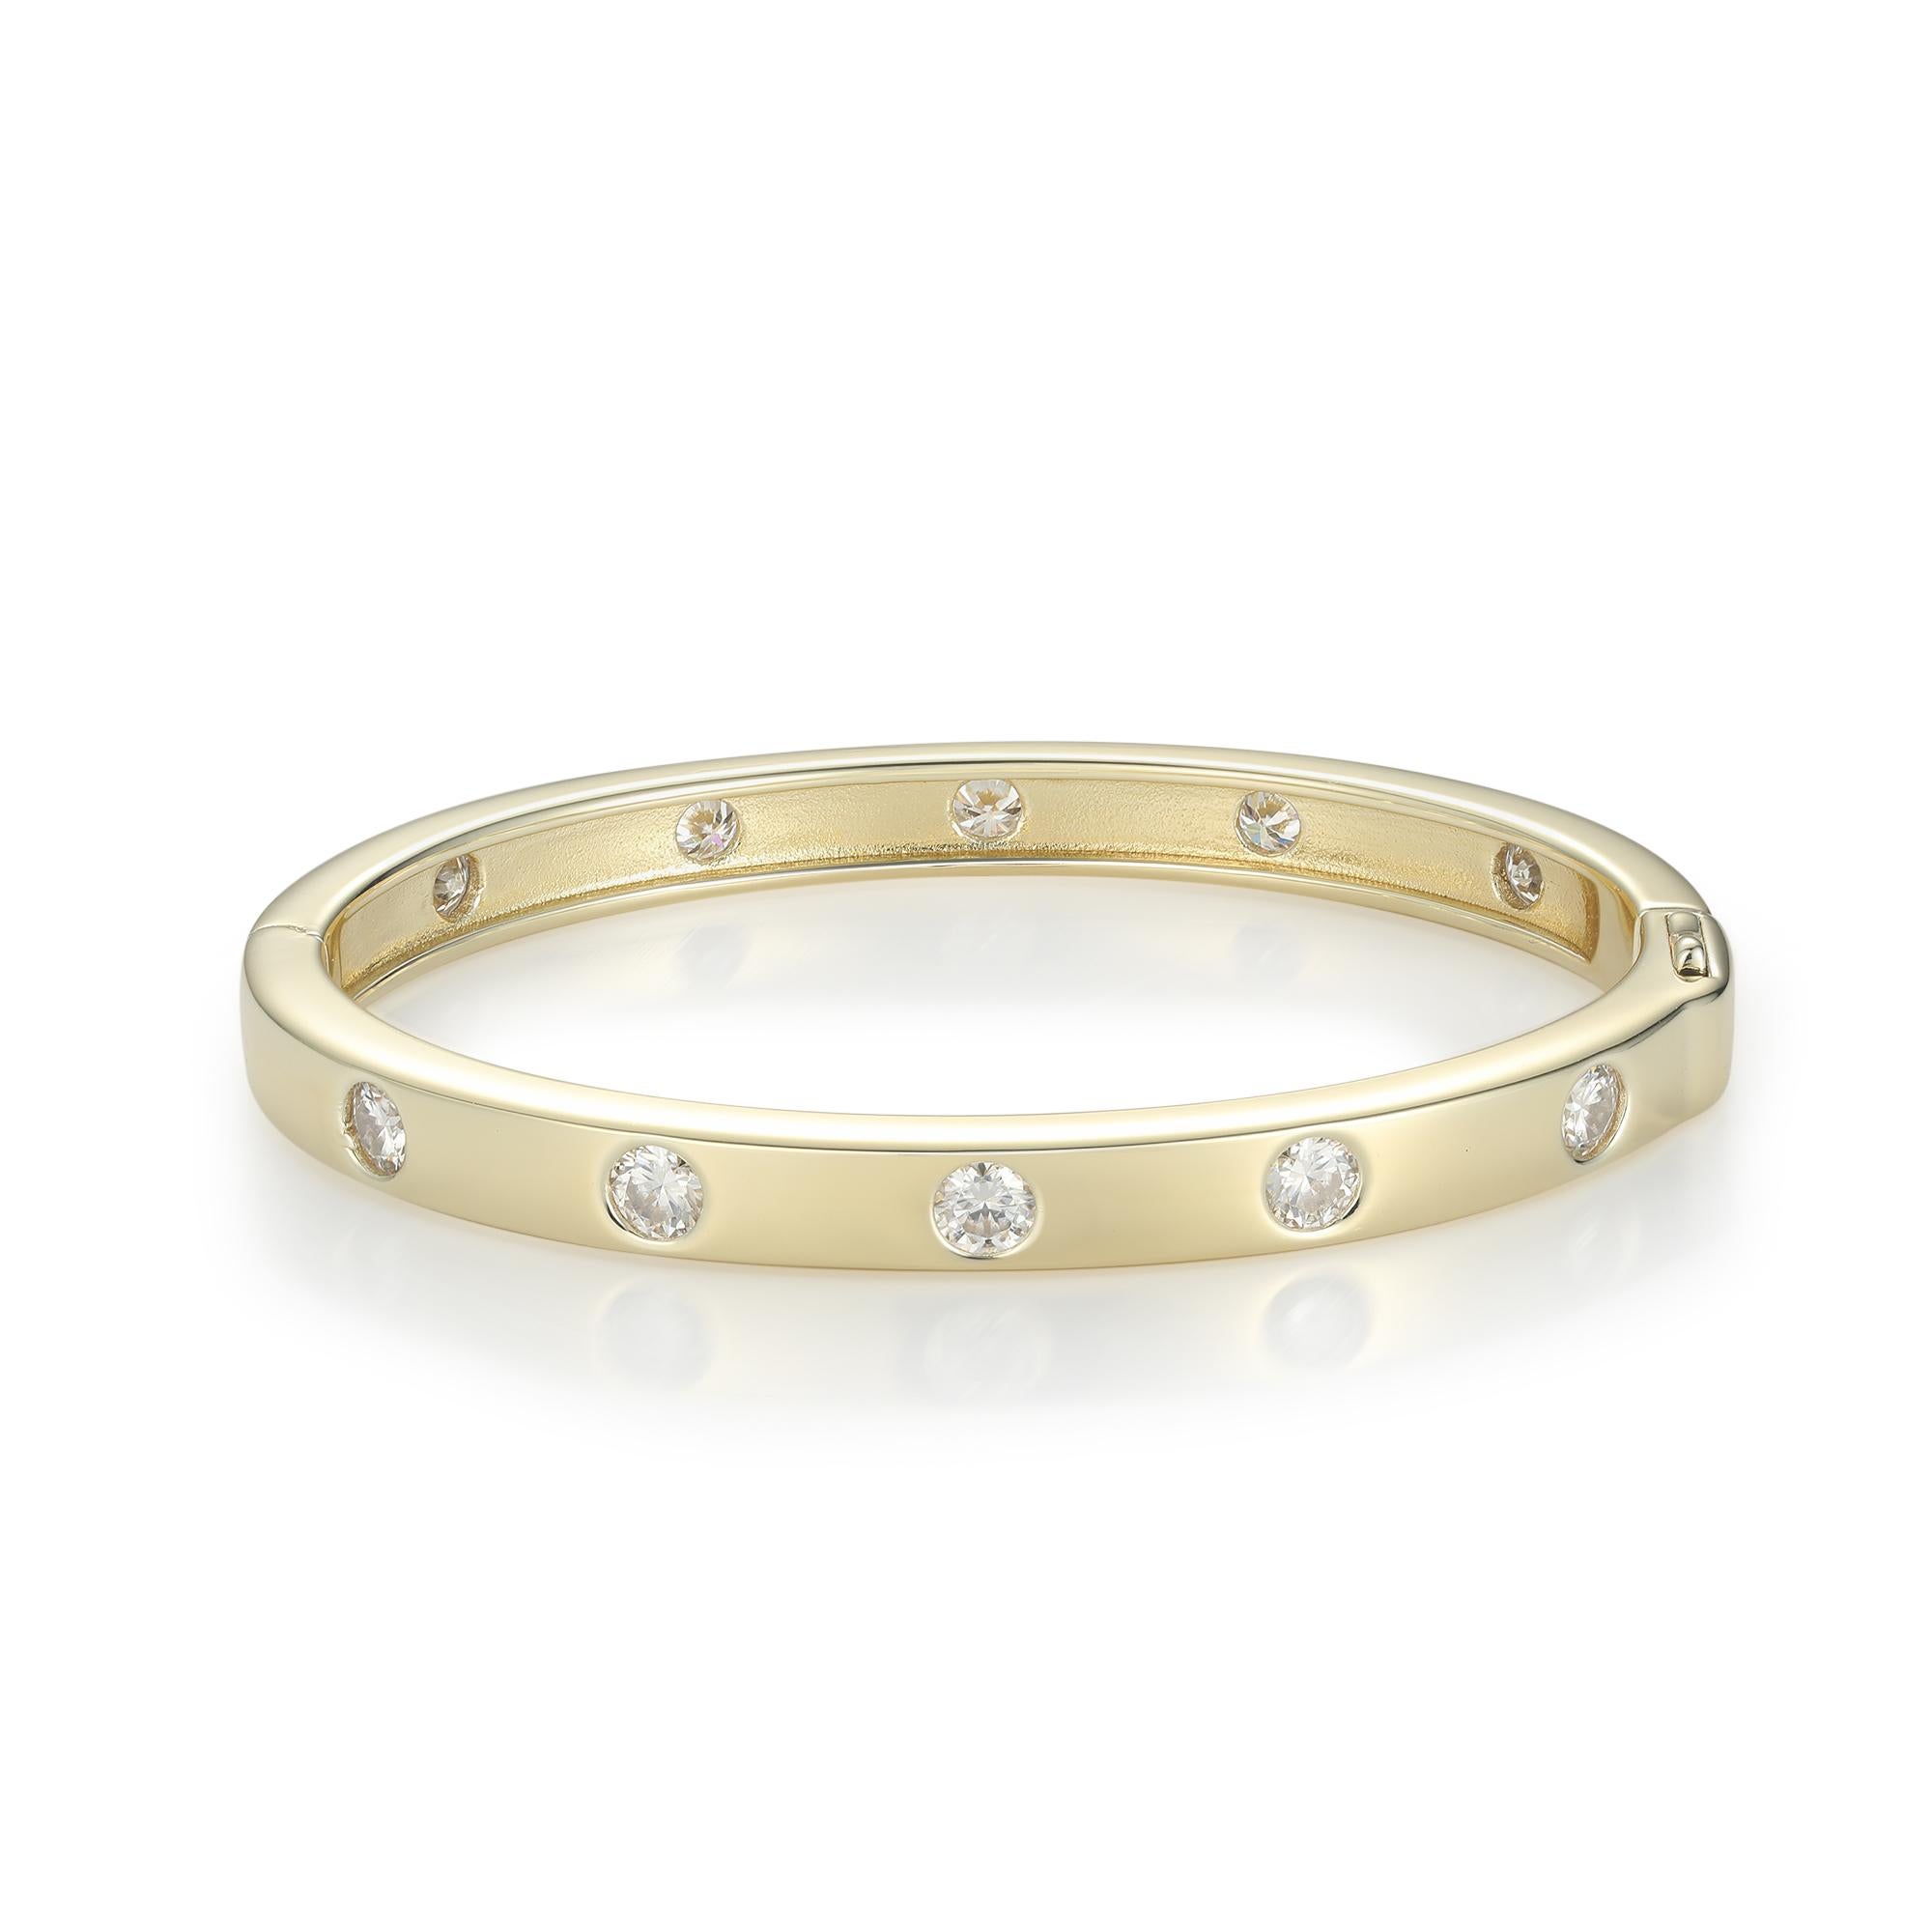 A bezel beauty! Create an enviable stack with this classic golden bangle. This best-selling style boasts a polished gold finished inlaid with 10 sparkling round-cut diamonds. An instant classic that will become your signature.

 
Bracelet